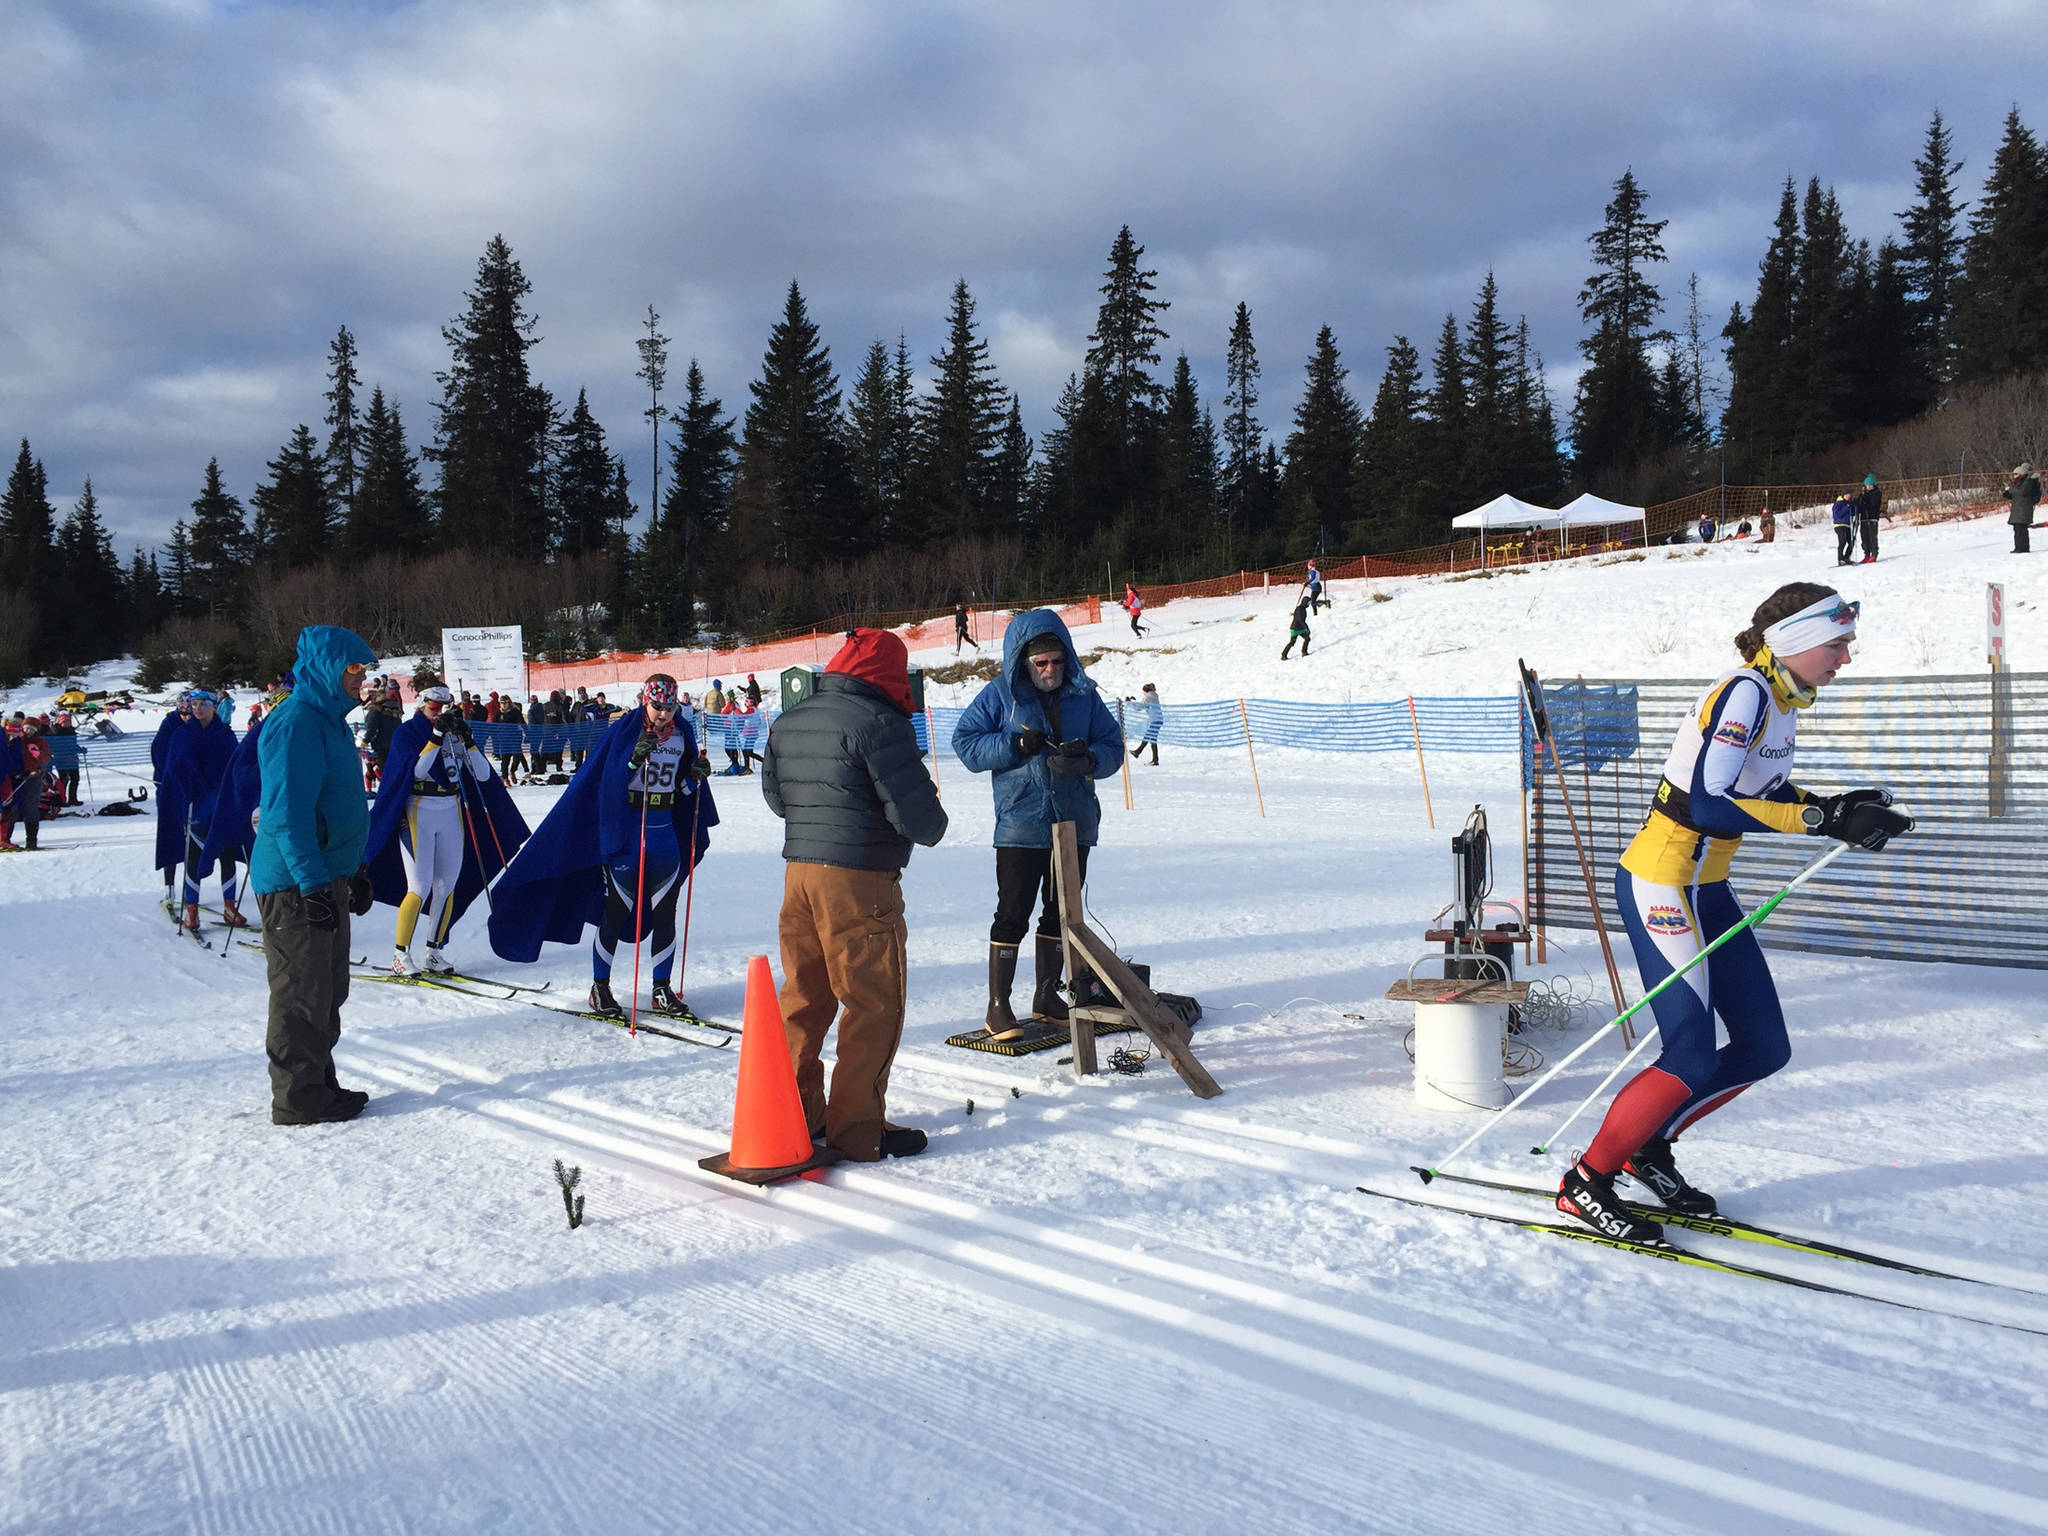 Skiers line up and take off one by one at the fourth race of the Besh Cup series Sunday, Jan. 21, 2018 at the Lookout Mountain Trails near Homer, Alaska.